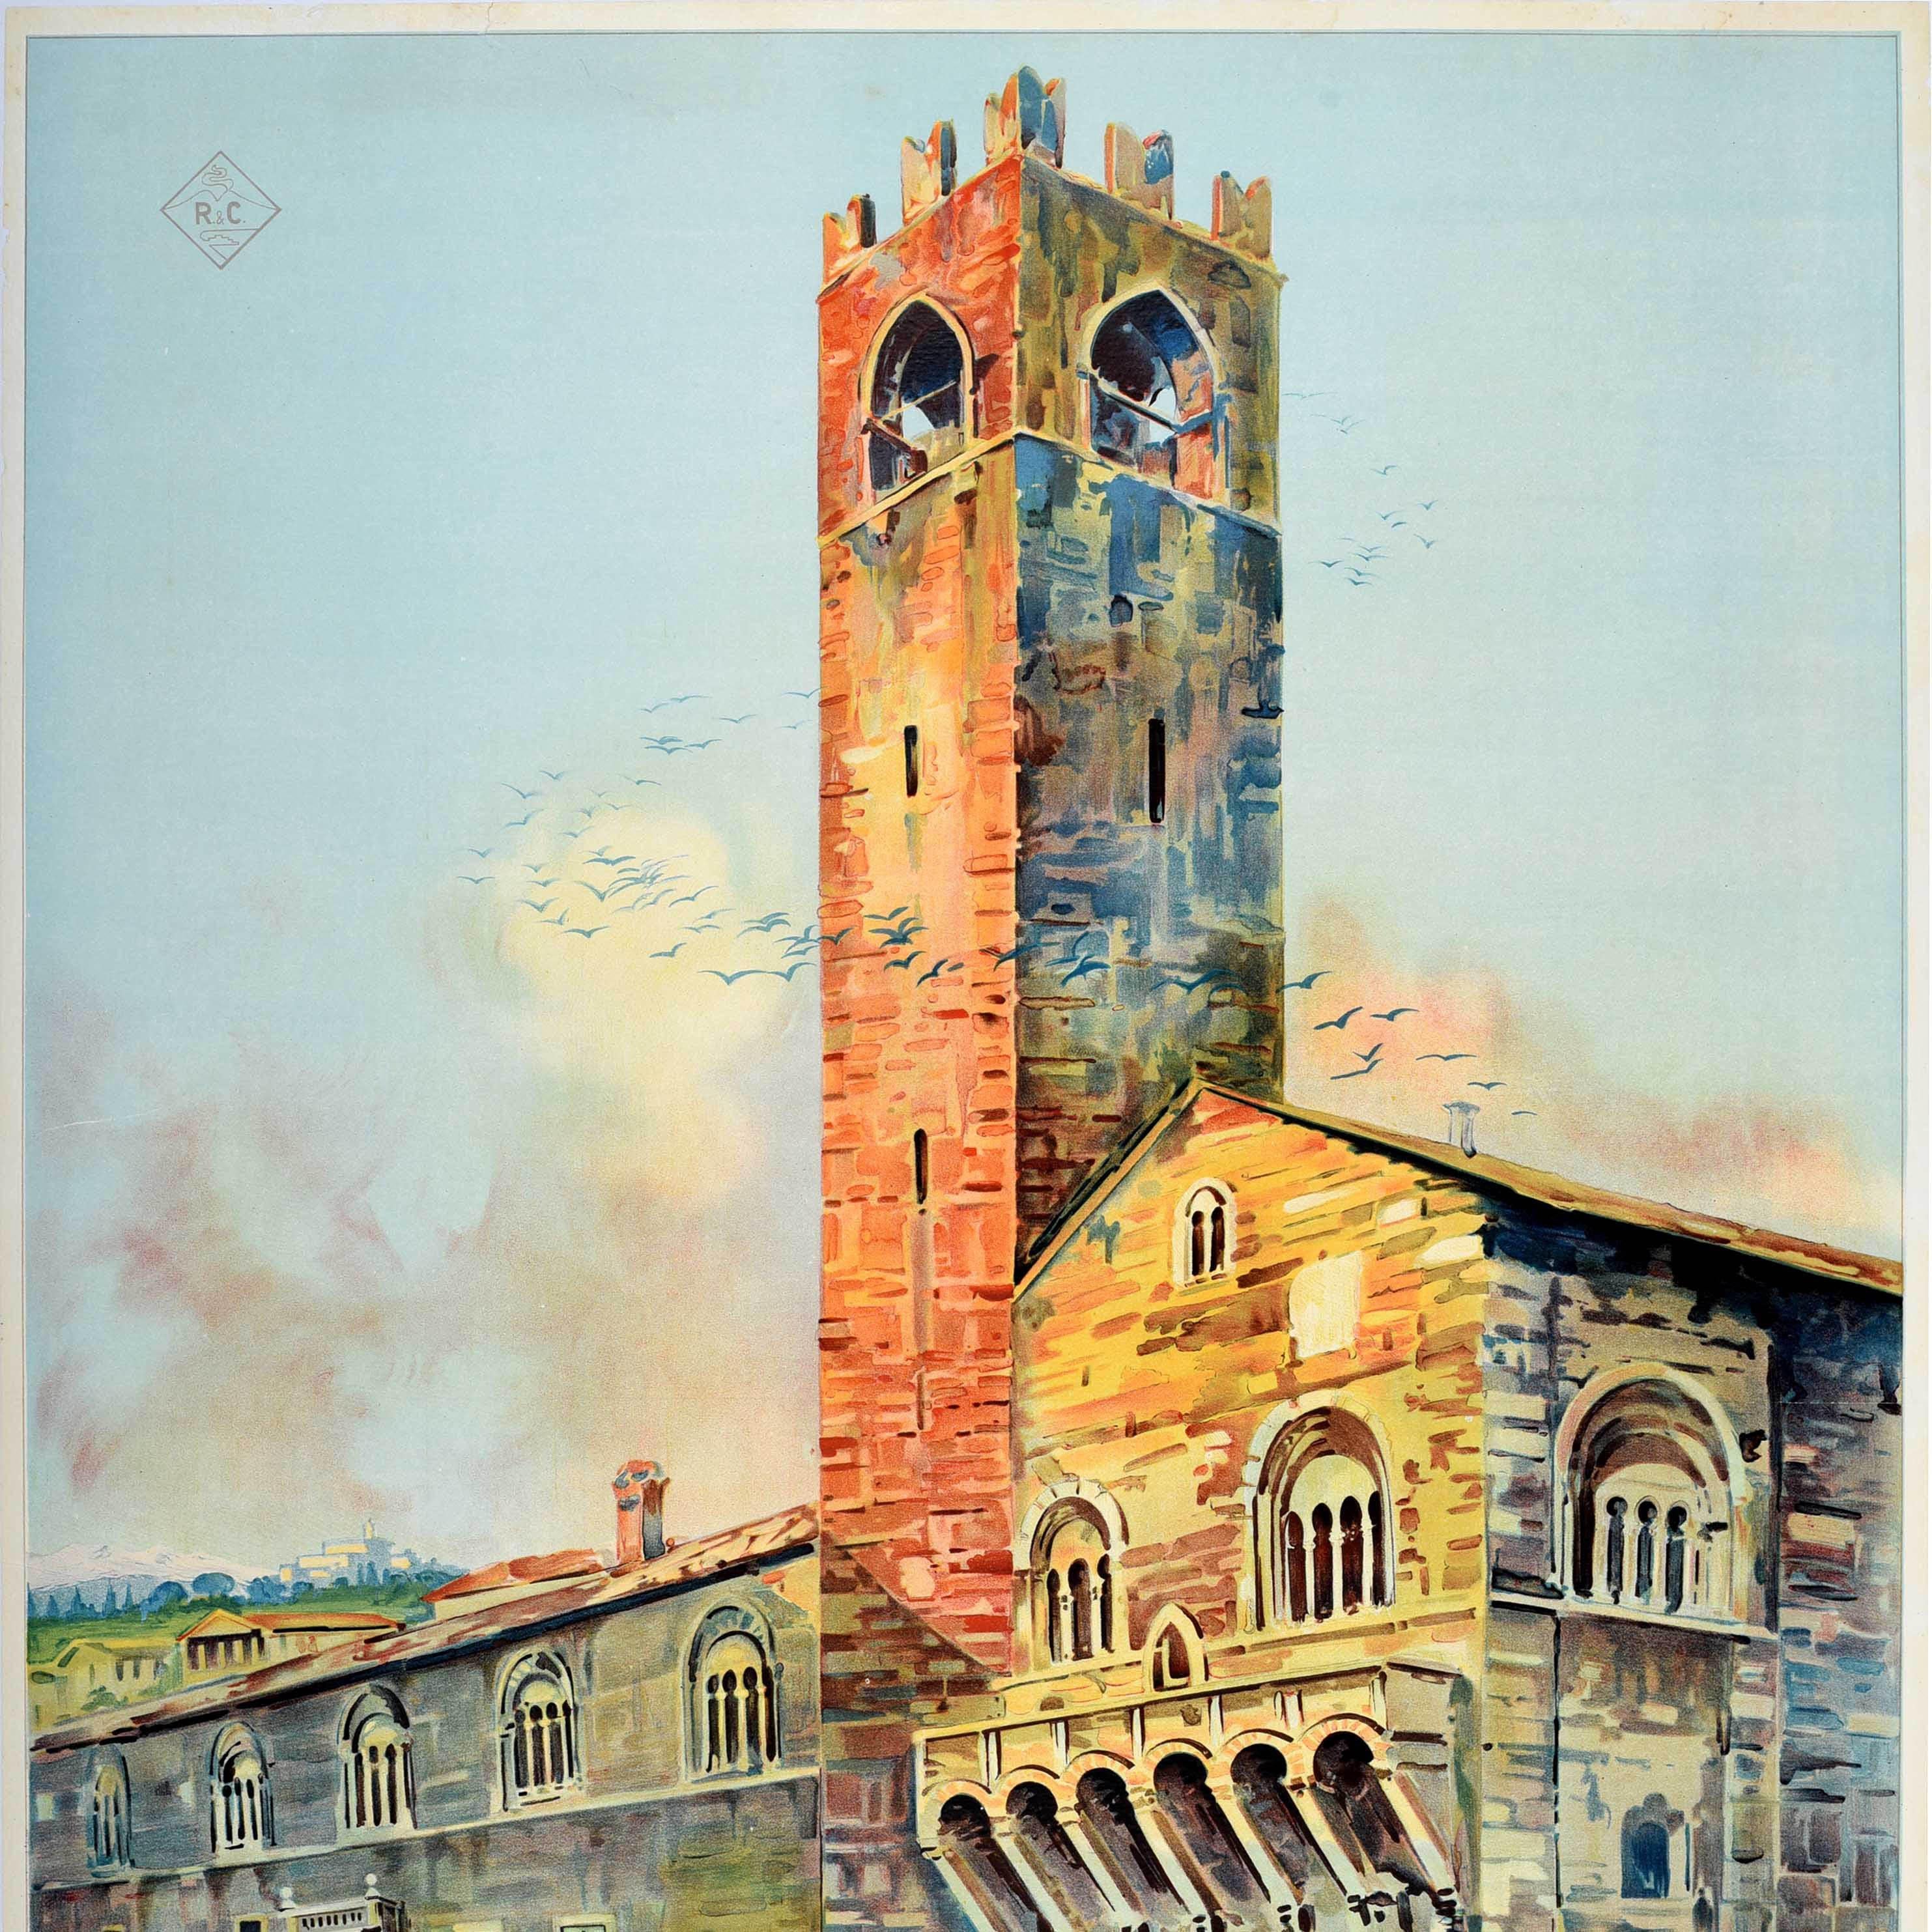 Original vintage travel poster for Brescia issued by the Italian Tourism Board ENIT featuring a flock of birds flying around the stone tower of the historic Palazzo Broletto Palace with people walking under the Piazza Balcony and along the civic